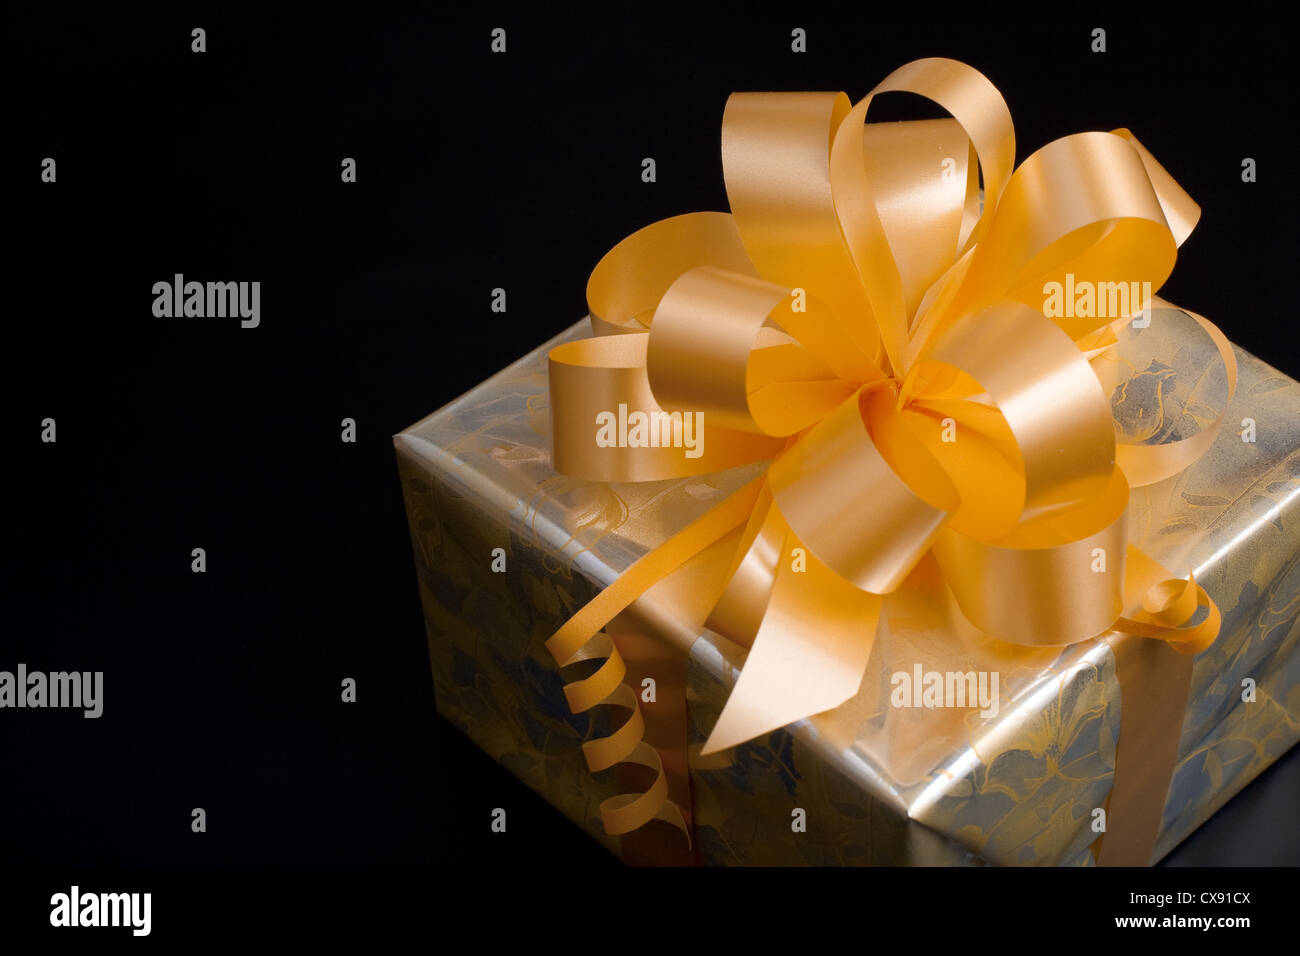 Nice gift packed in golden paper with yellow bow on black background Stock Photo